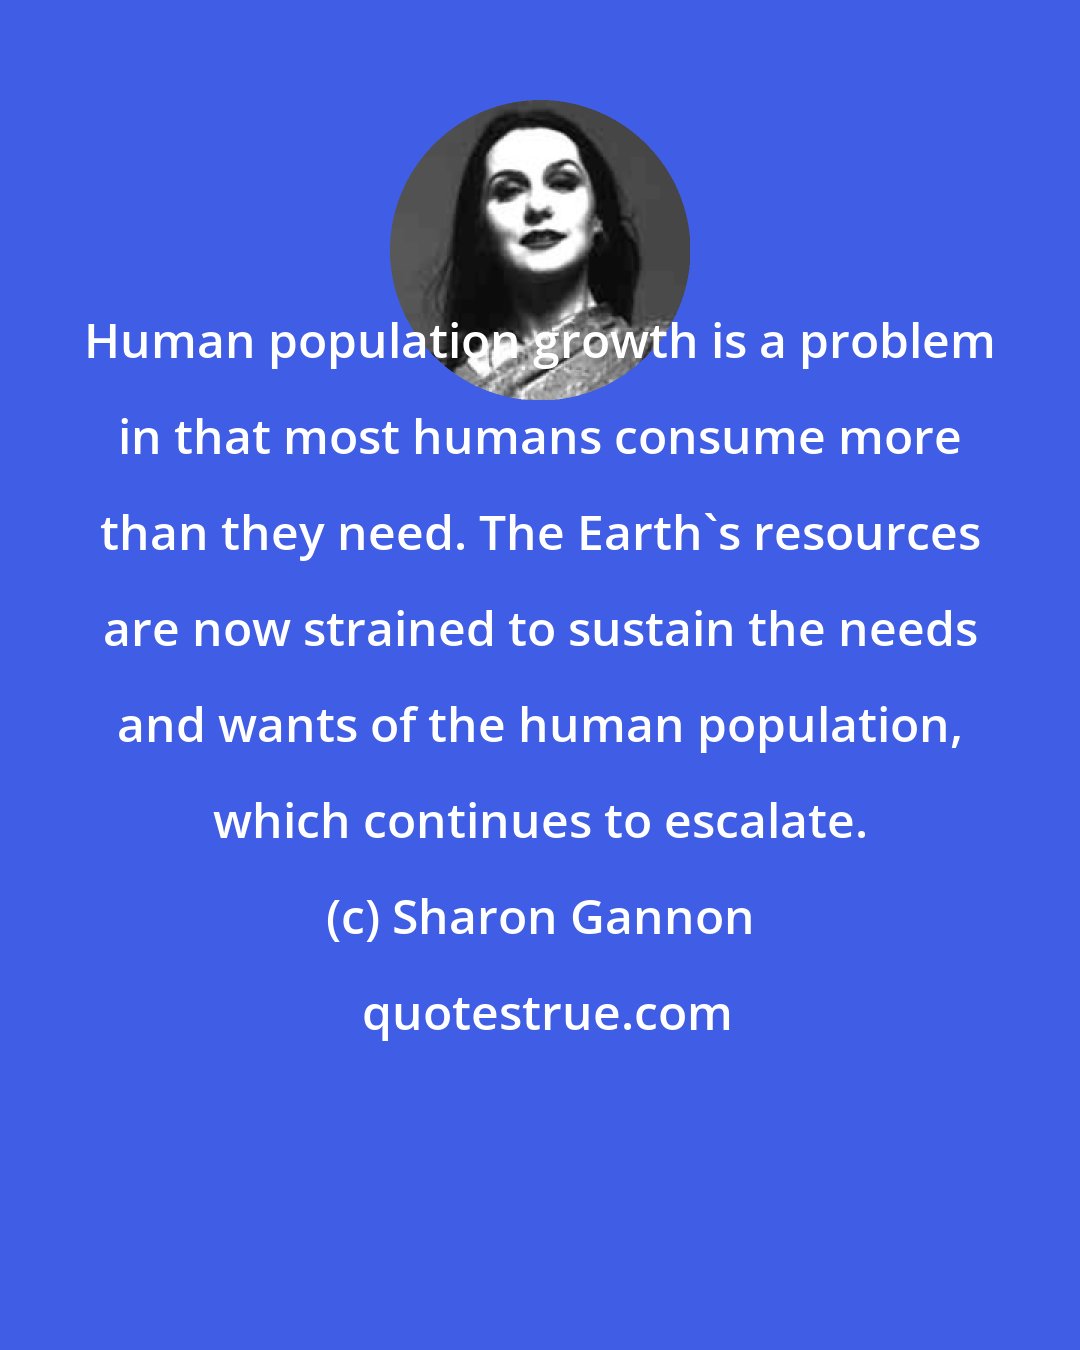 Sharon Gannon: Human population growth is a problem in that most humans consume more than they need. The Earth's resources are now strained to sustain the needs and wants of the human population, which continues to escalate.